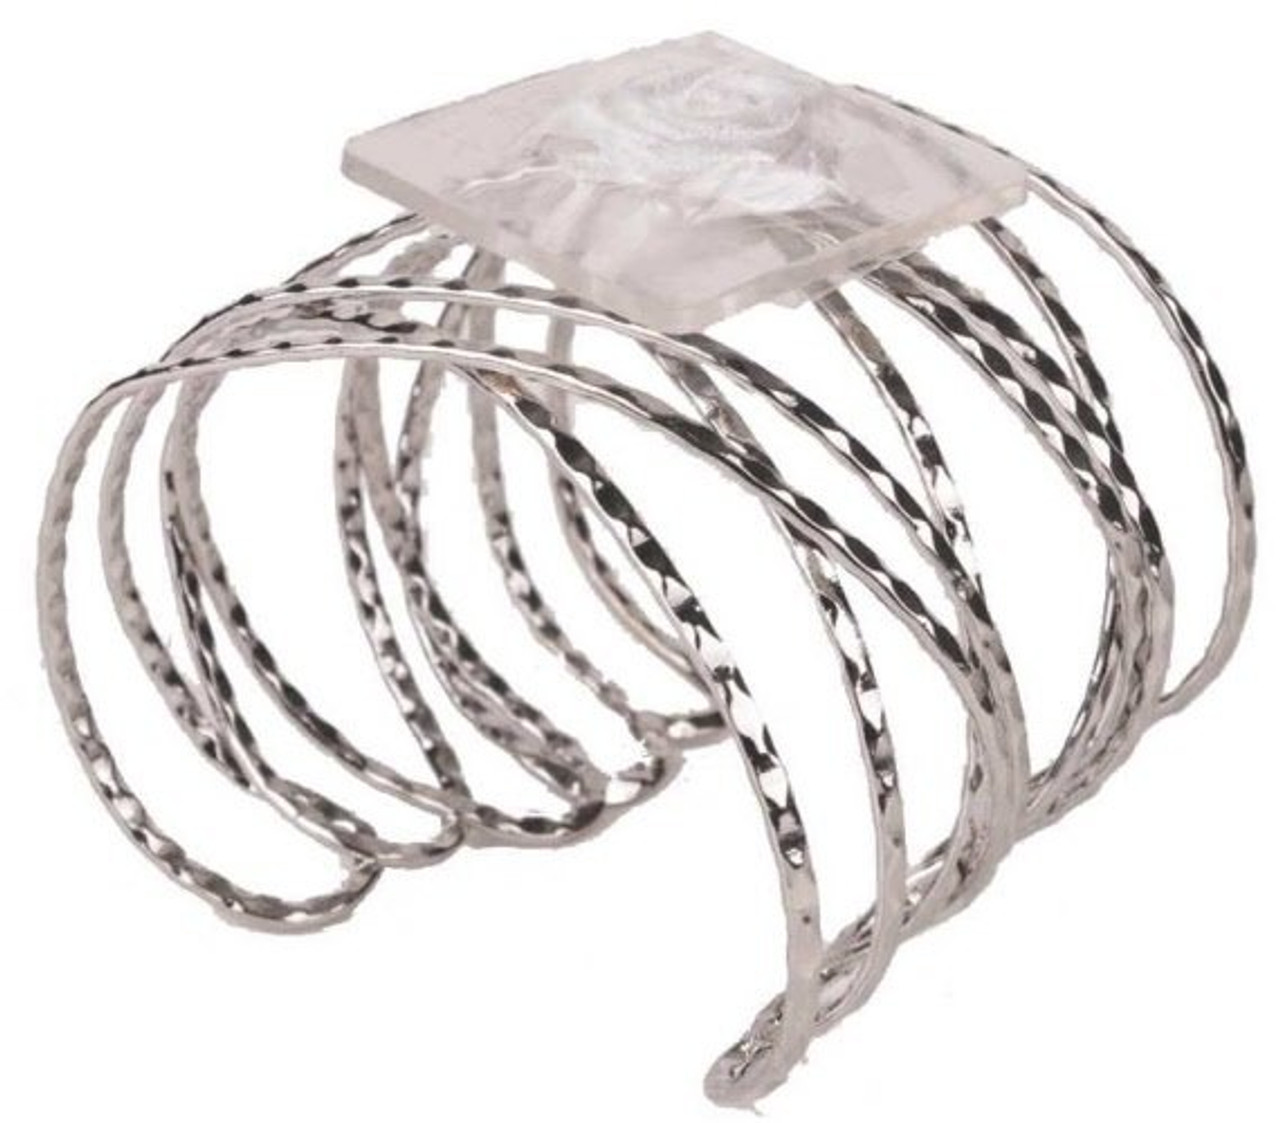 Knotted Links Sterling Silver Toggle Bracelet For Woman - Walmart.com